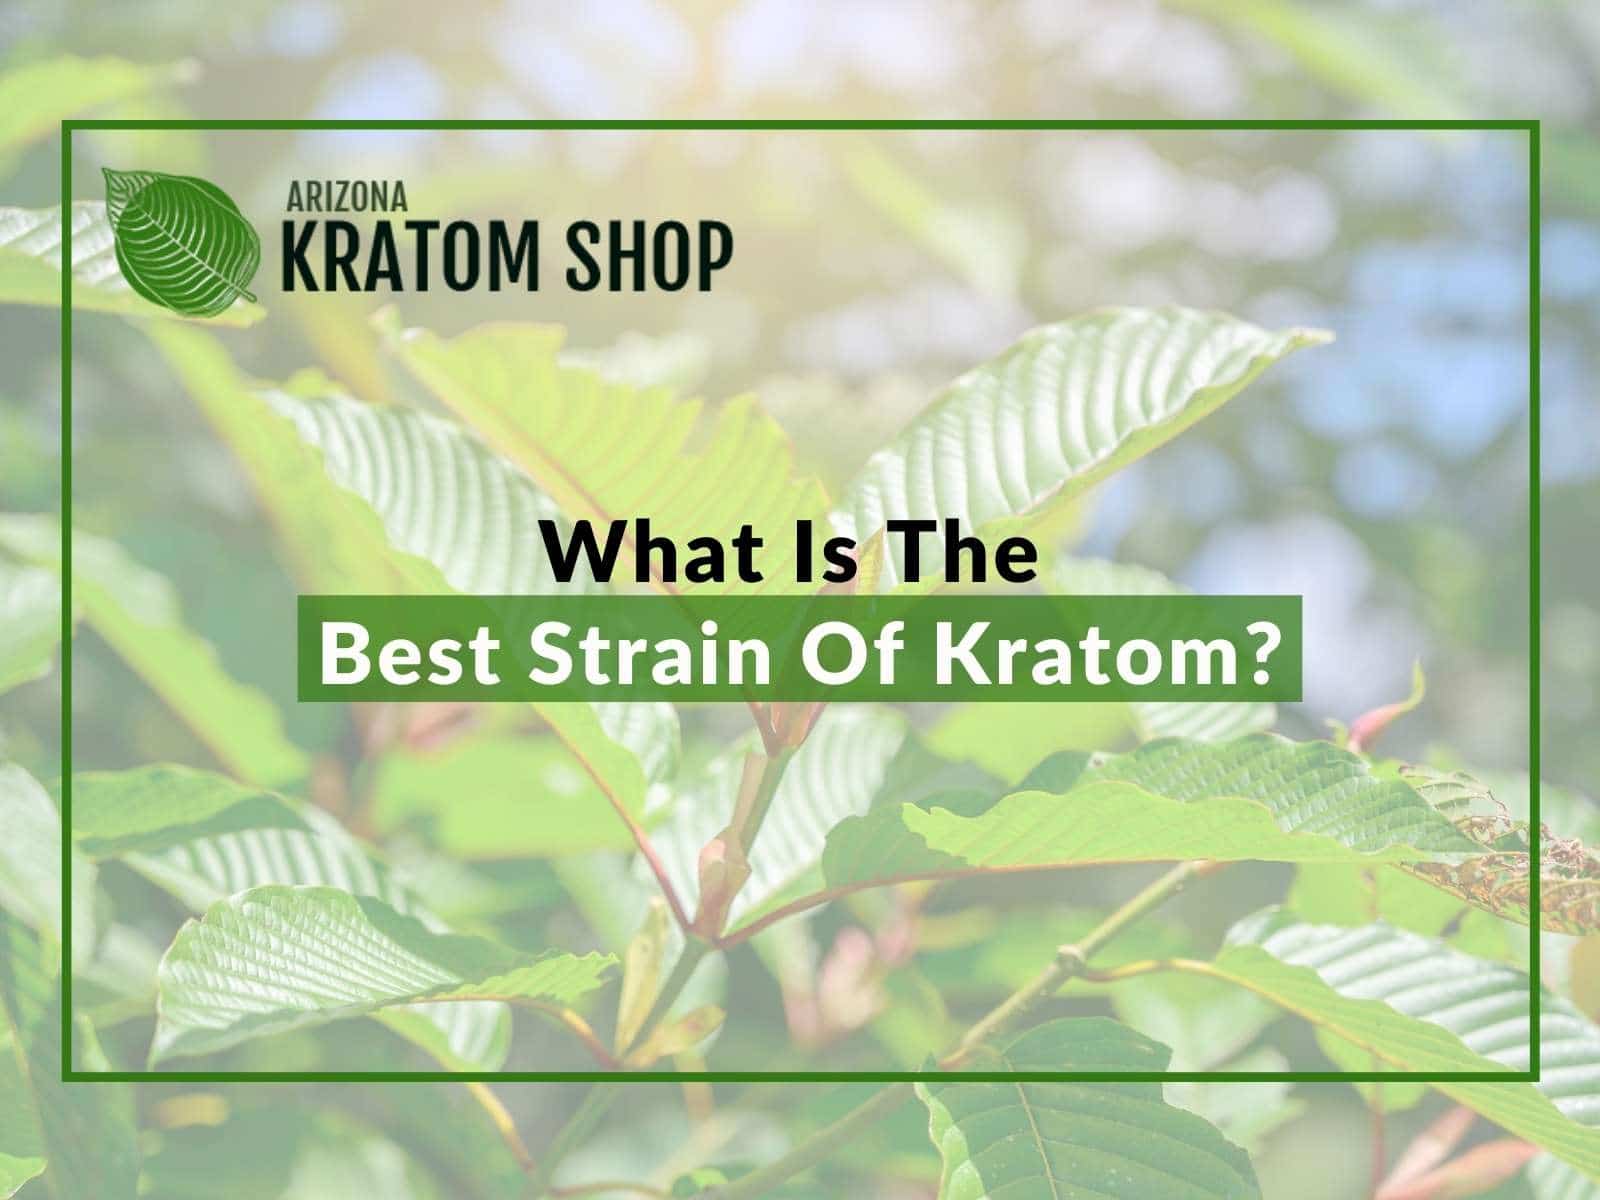 What Is The Best Strain Of Kratom?